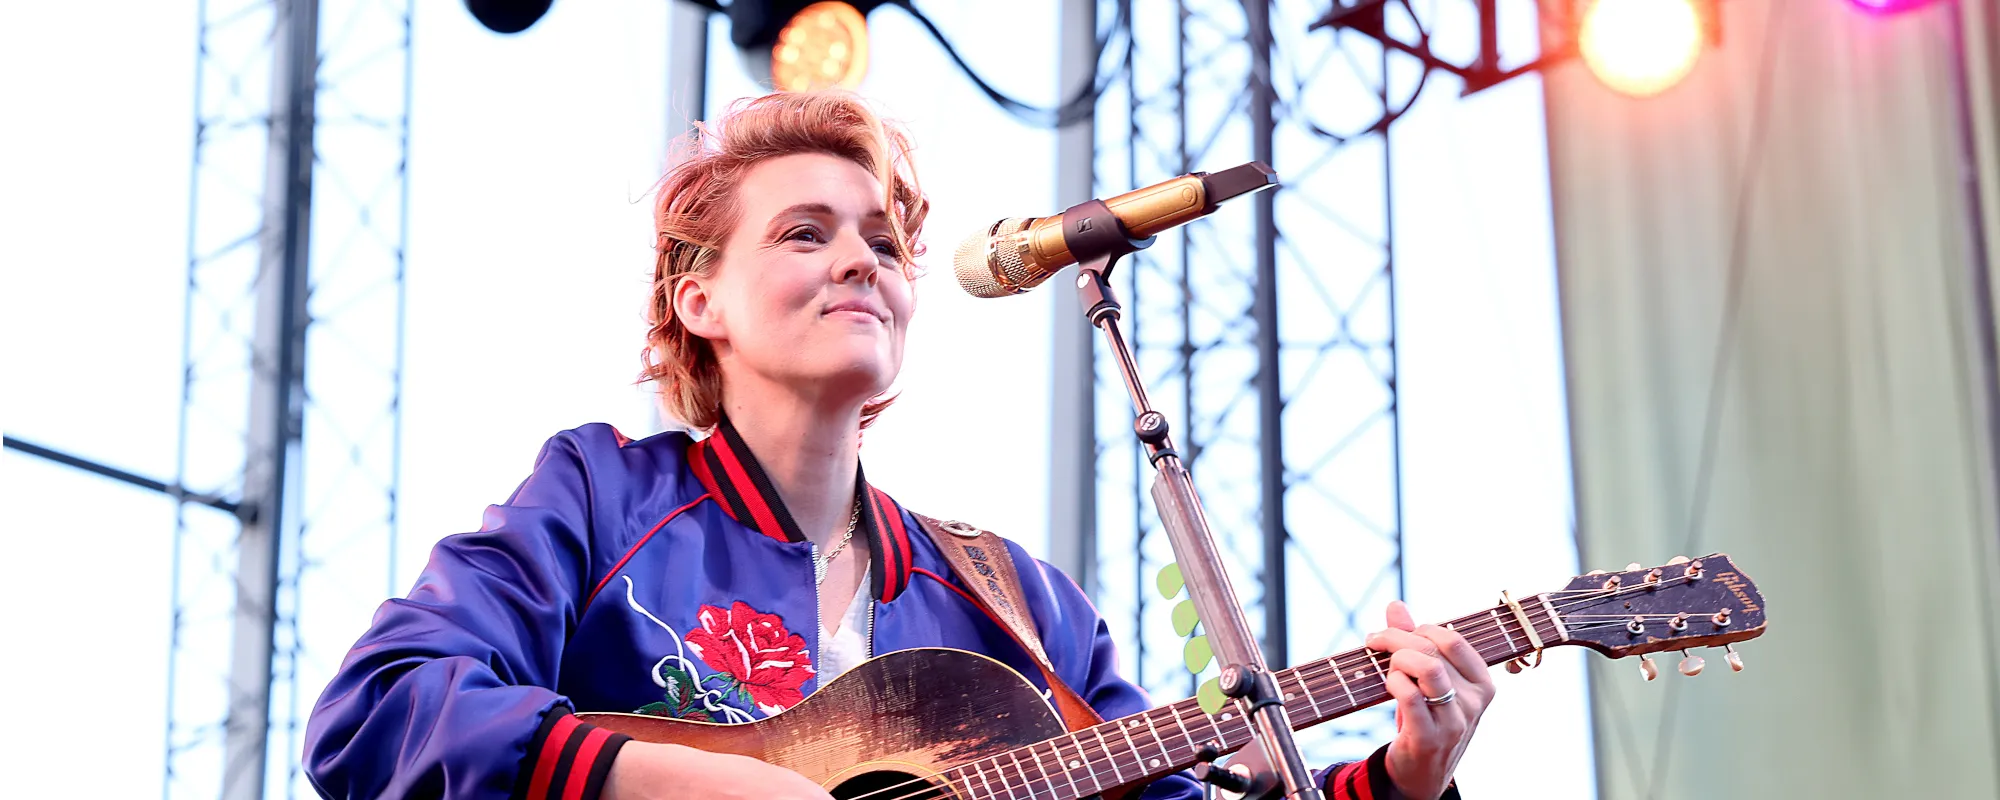 Brandi Carlile Teams Up with Jacob Collier for “Little Blue”